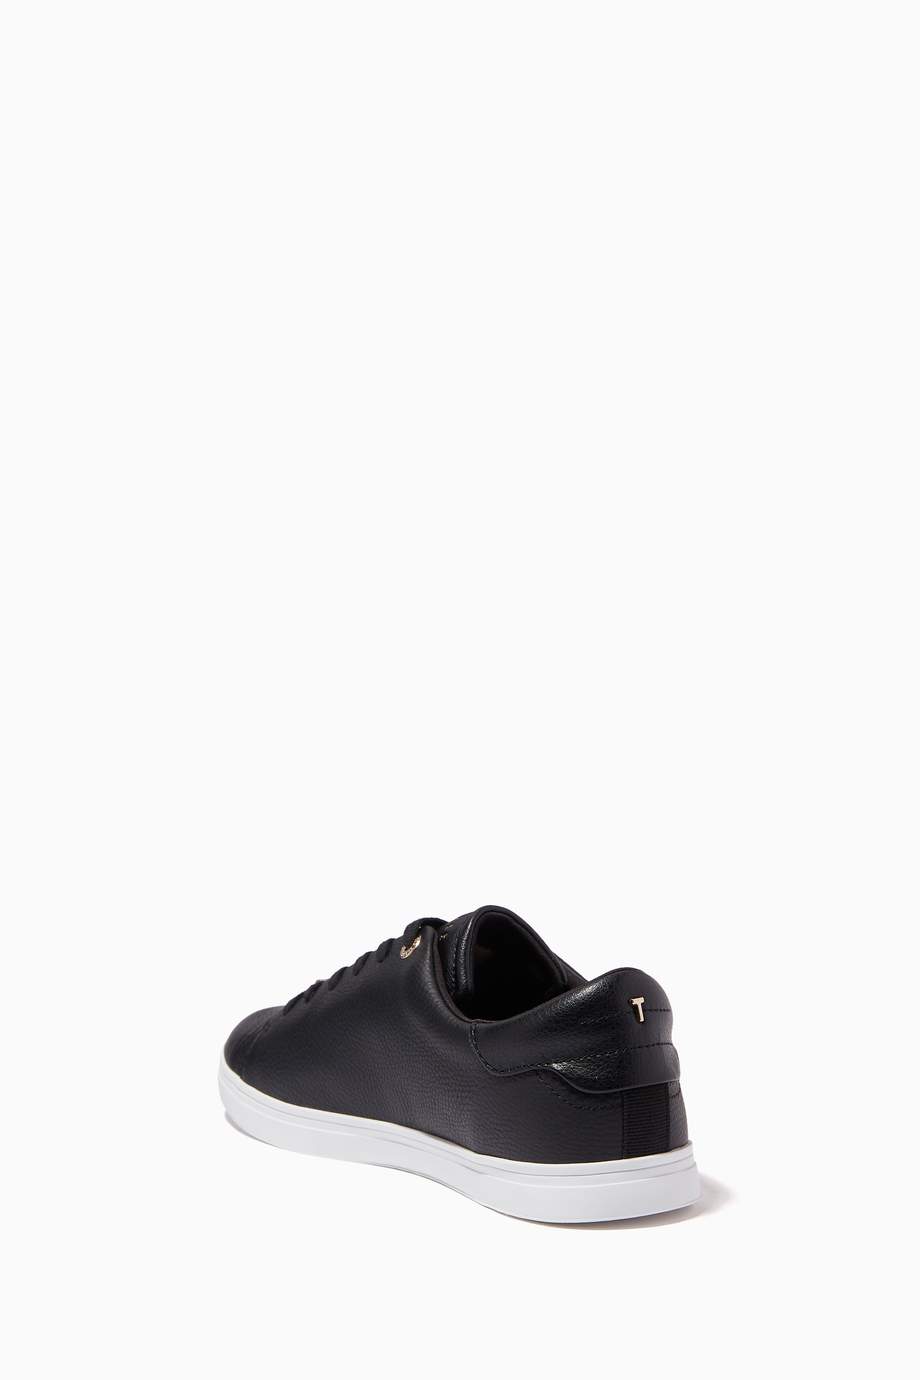 Shop Ted Baker Black Feeka Trainers in Leather for Women | Ounass Saudi